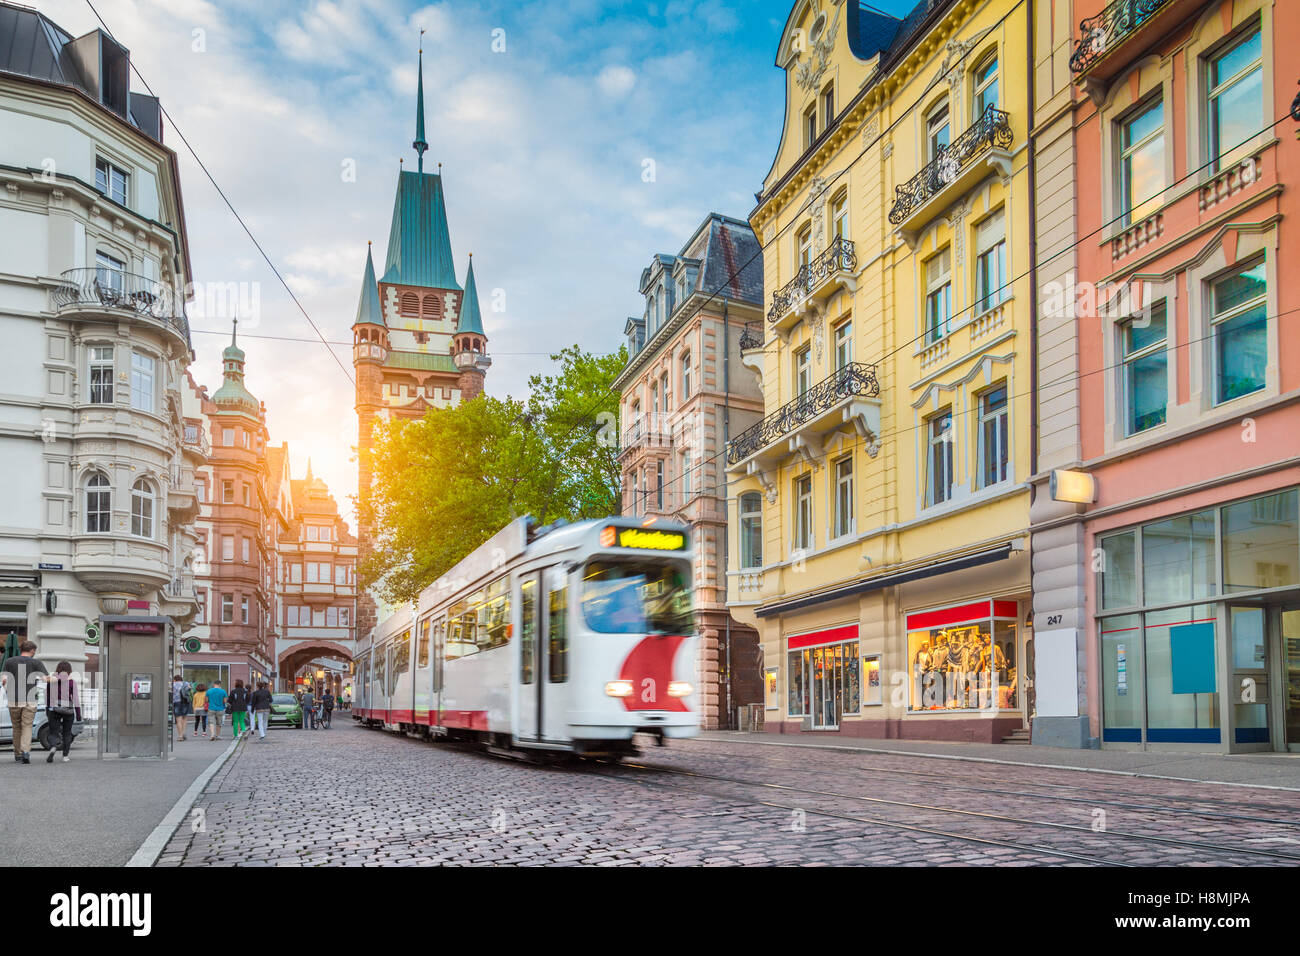 Historic town of Freiburg im Breisgau with traditional tram and famous Martin's Gate at sunset, Baden-Wurttemberg, Germany Stock Photo